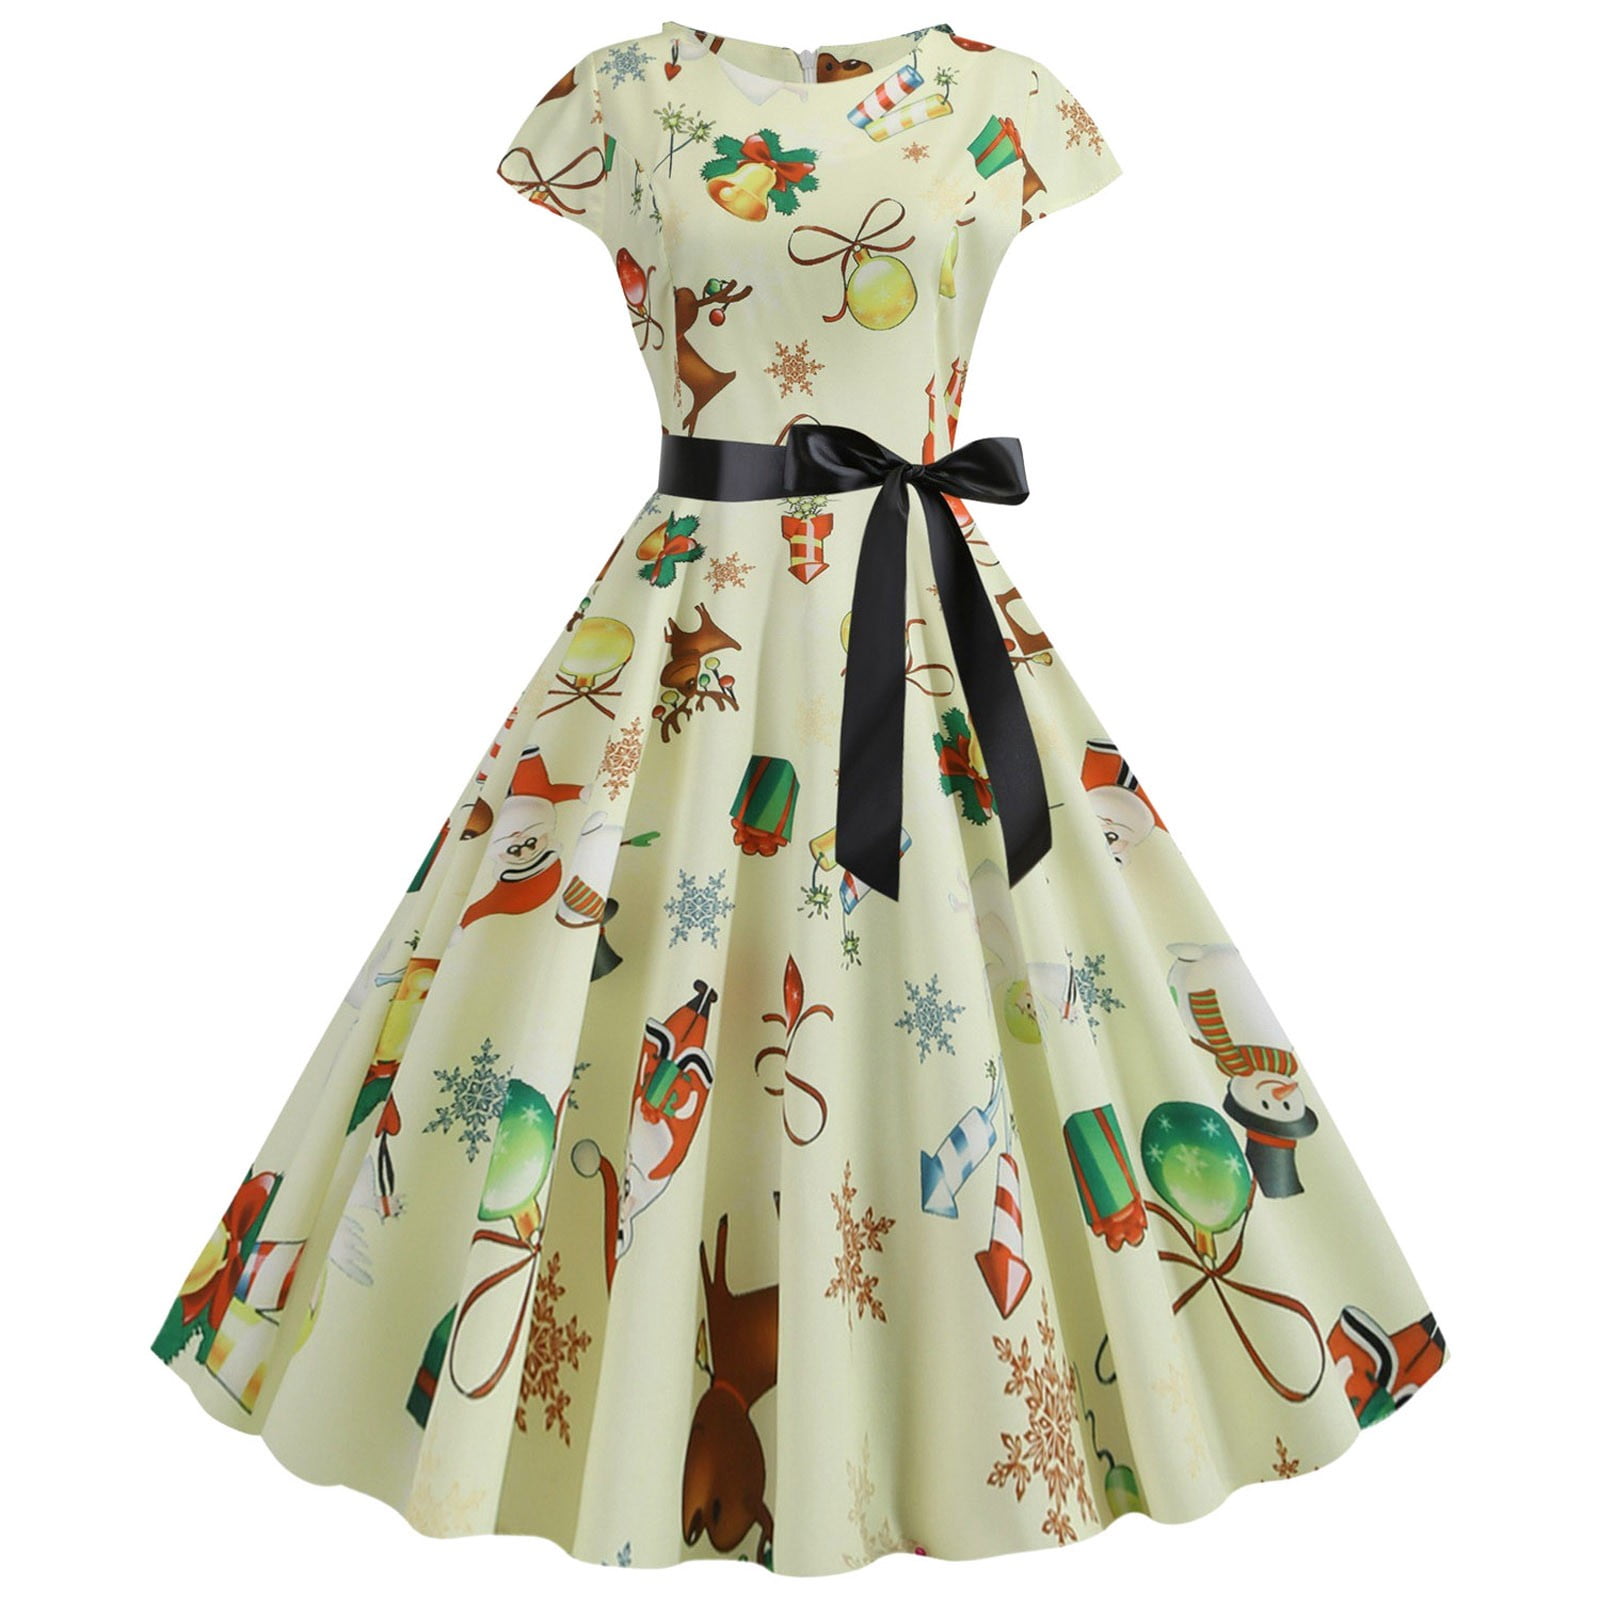 The Best Vintage Summer Dresses - Retro Housewife Goes Green